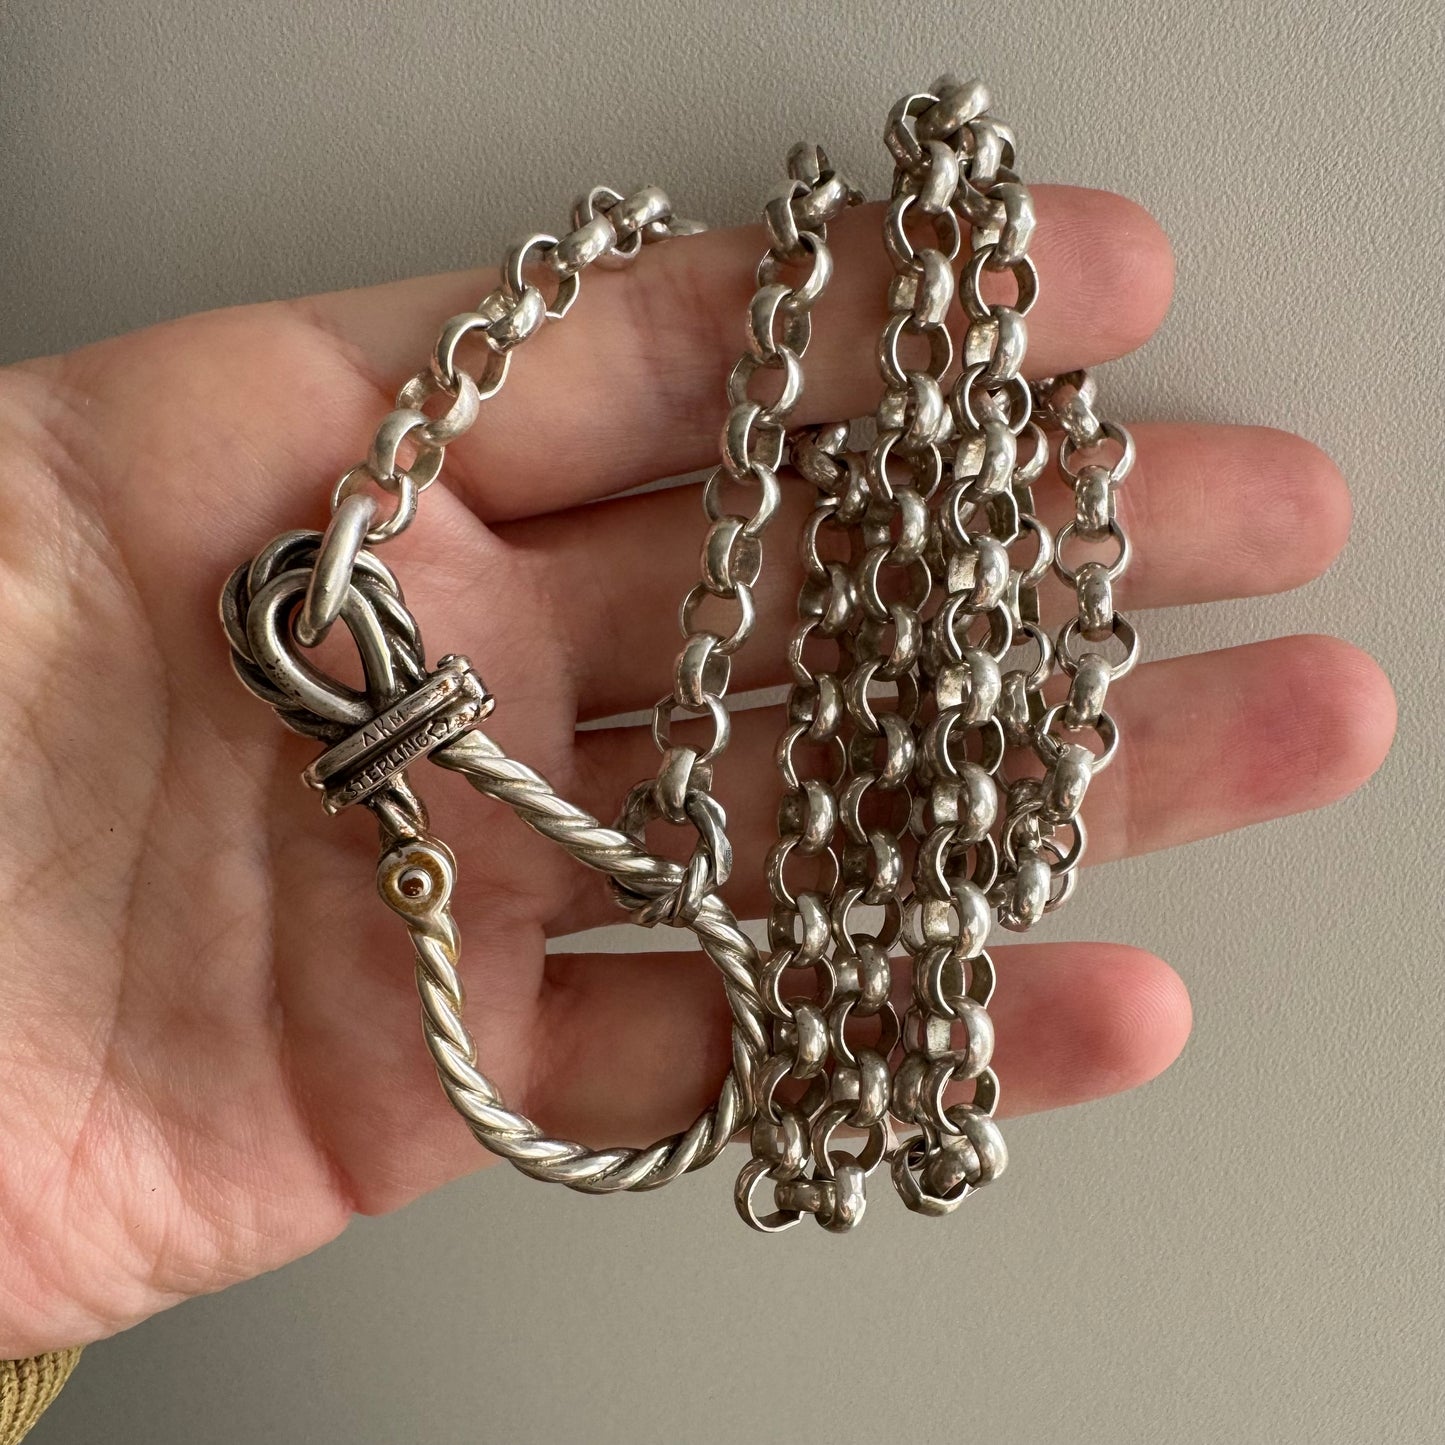 reimagined V I N T A G E // twisted connector / sterling silver rolo chain with carabiner pendant holder / 25.5", 50g